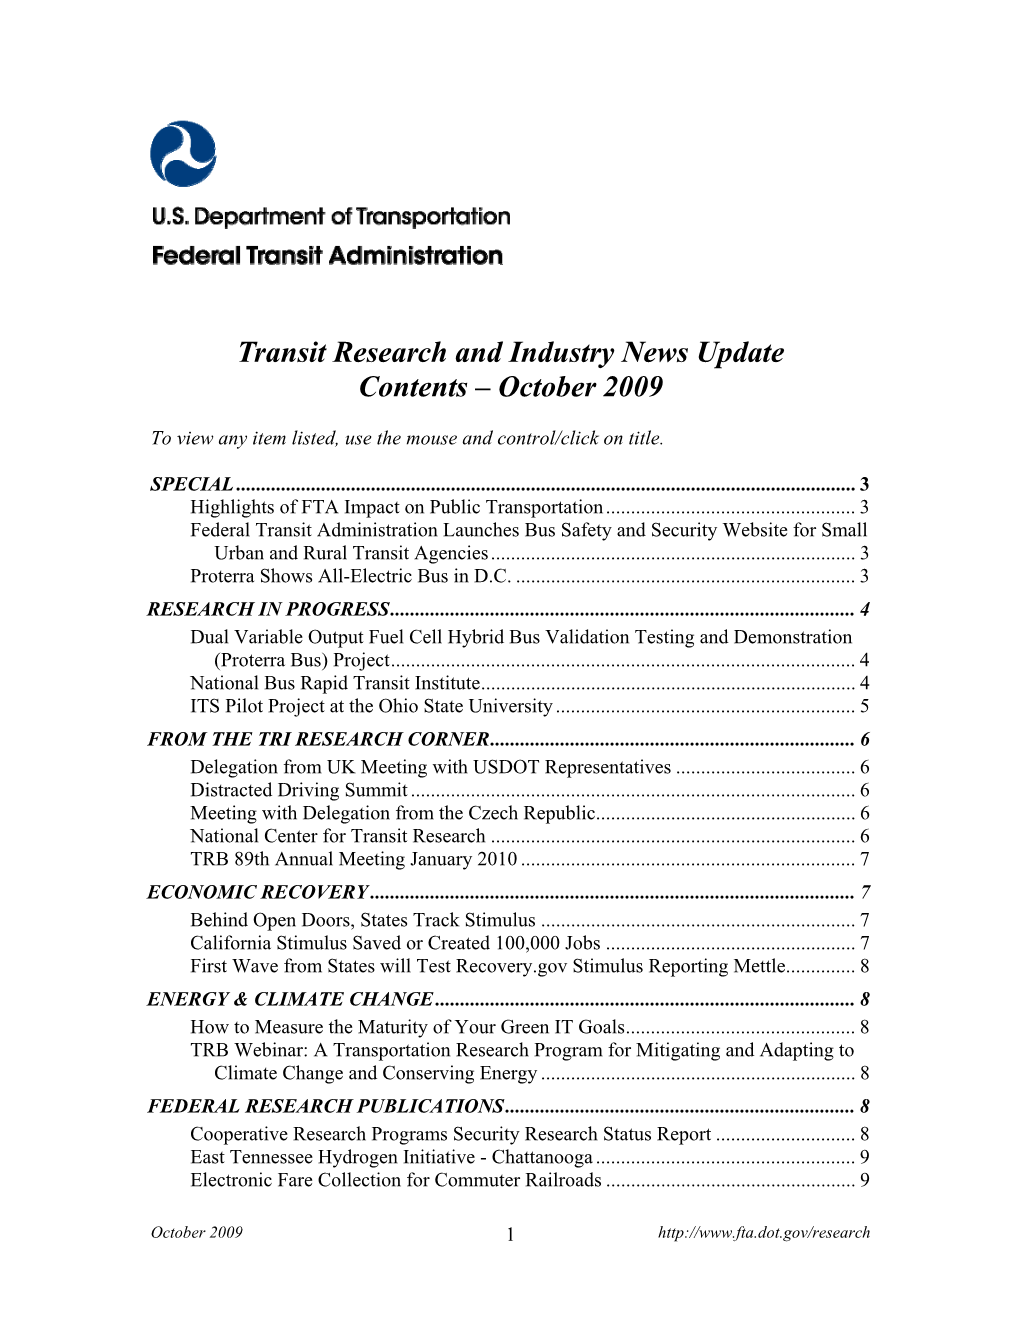 October 2009 Transit Research Update